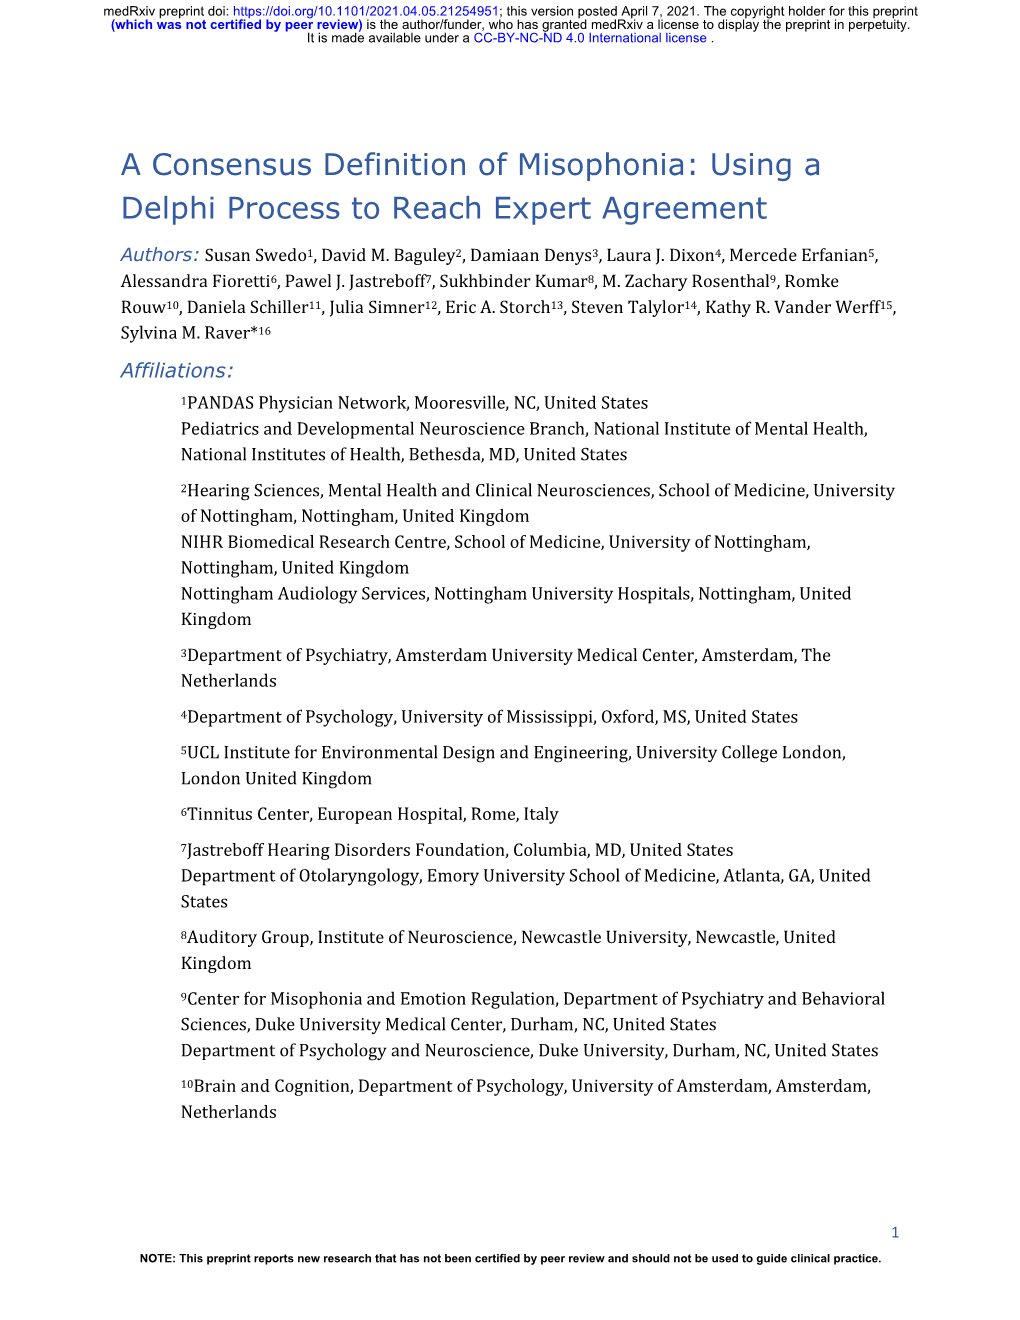 A Consensus Definition of Misophonia: Using a Delphi Process to Reach Expert Agreement